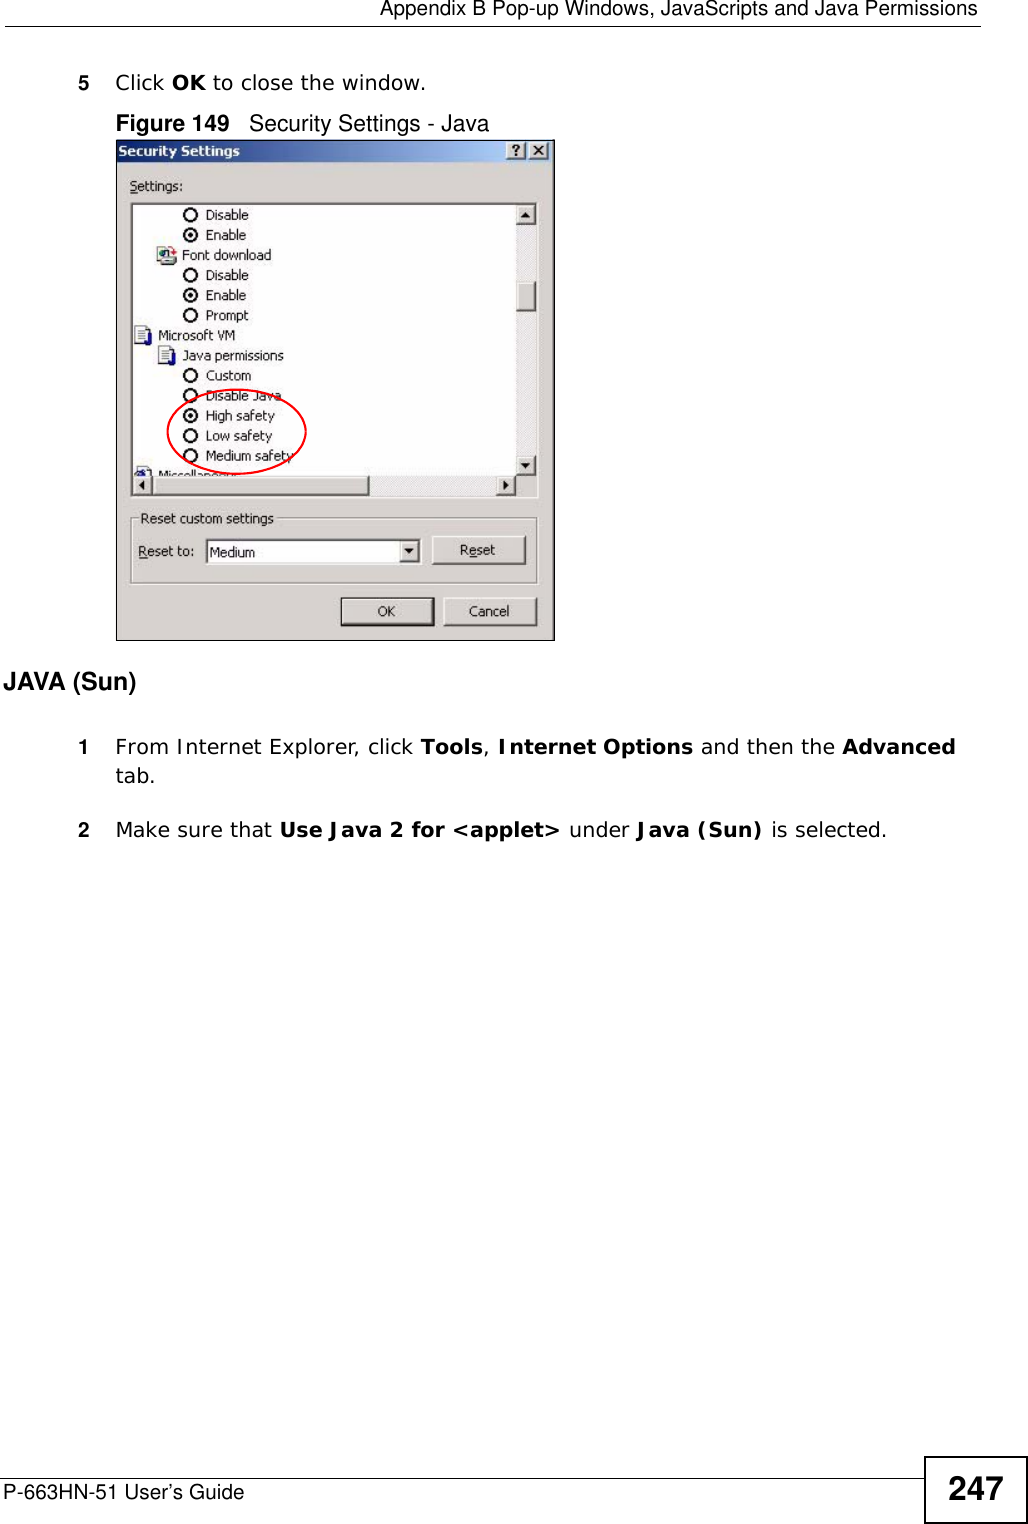  Appendix B Pop-up Windows, JavaScripts and Java PermissionsP-663HN-51 User’s Guide 2475Click OK to close the window.Figure 149   Security Settings - Java JAVA (Sun)1From Internet Explorer, click Tools, Internet Options and then the Advanced tab. 2Make sure that Use Java 2 for &lt;applet&gt; under Java (Sun) is selected.